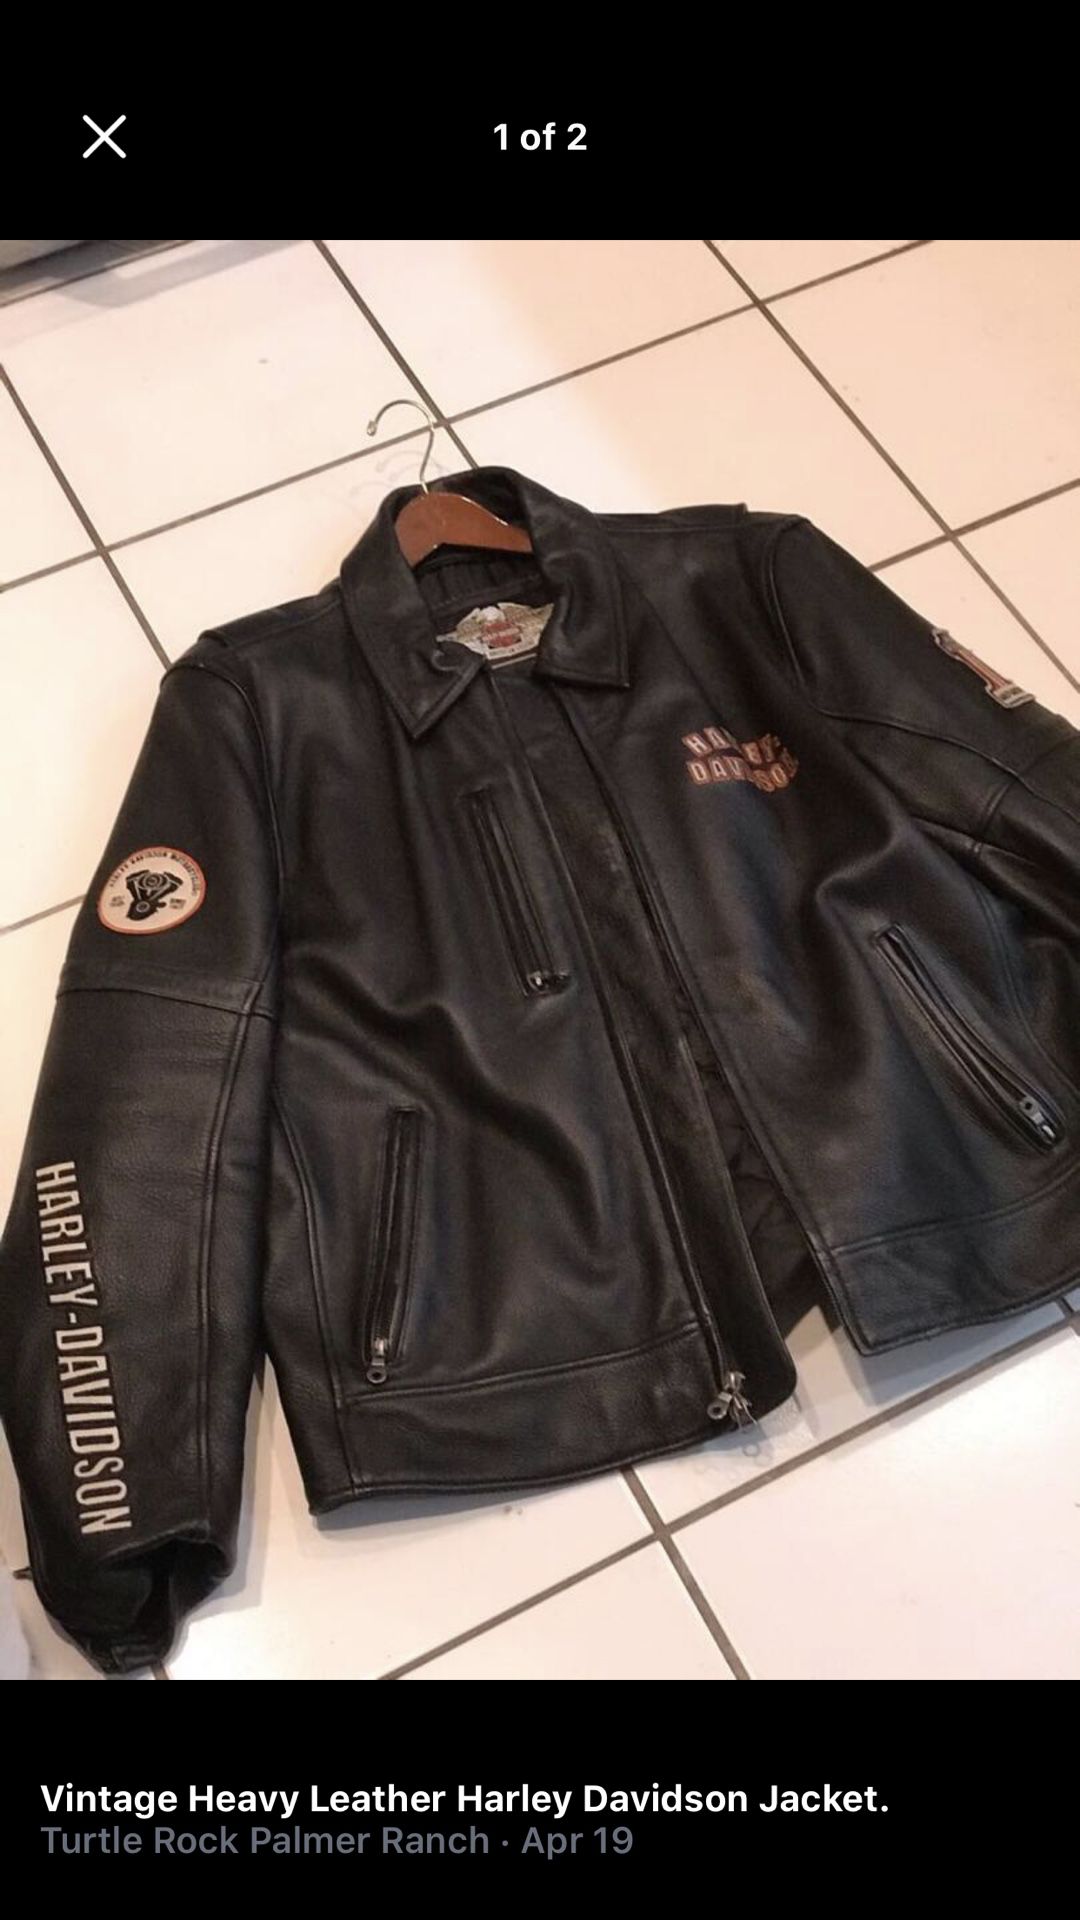 Harley Davidson Leather Riding Jacket XL with liner.